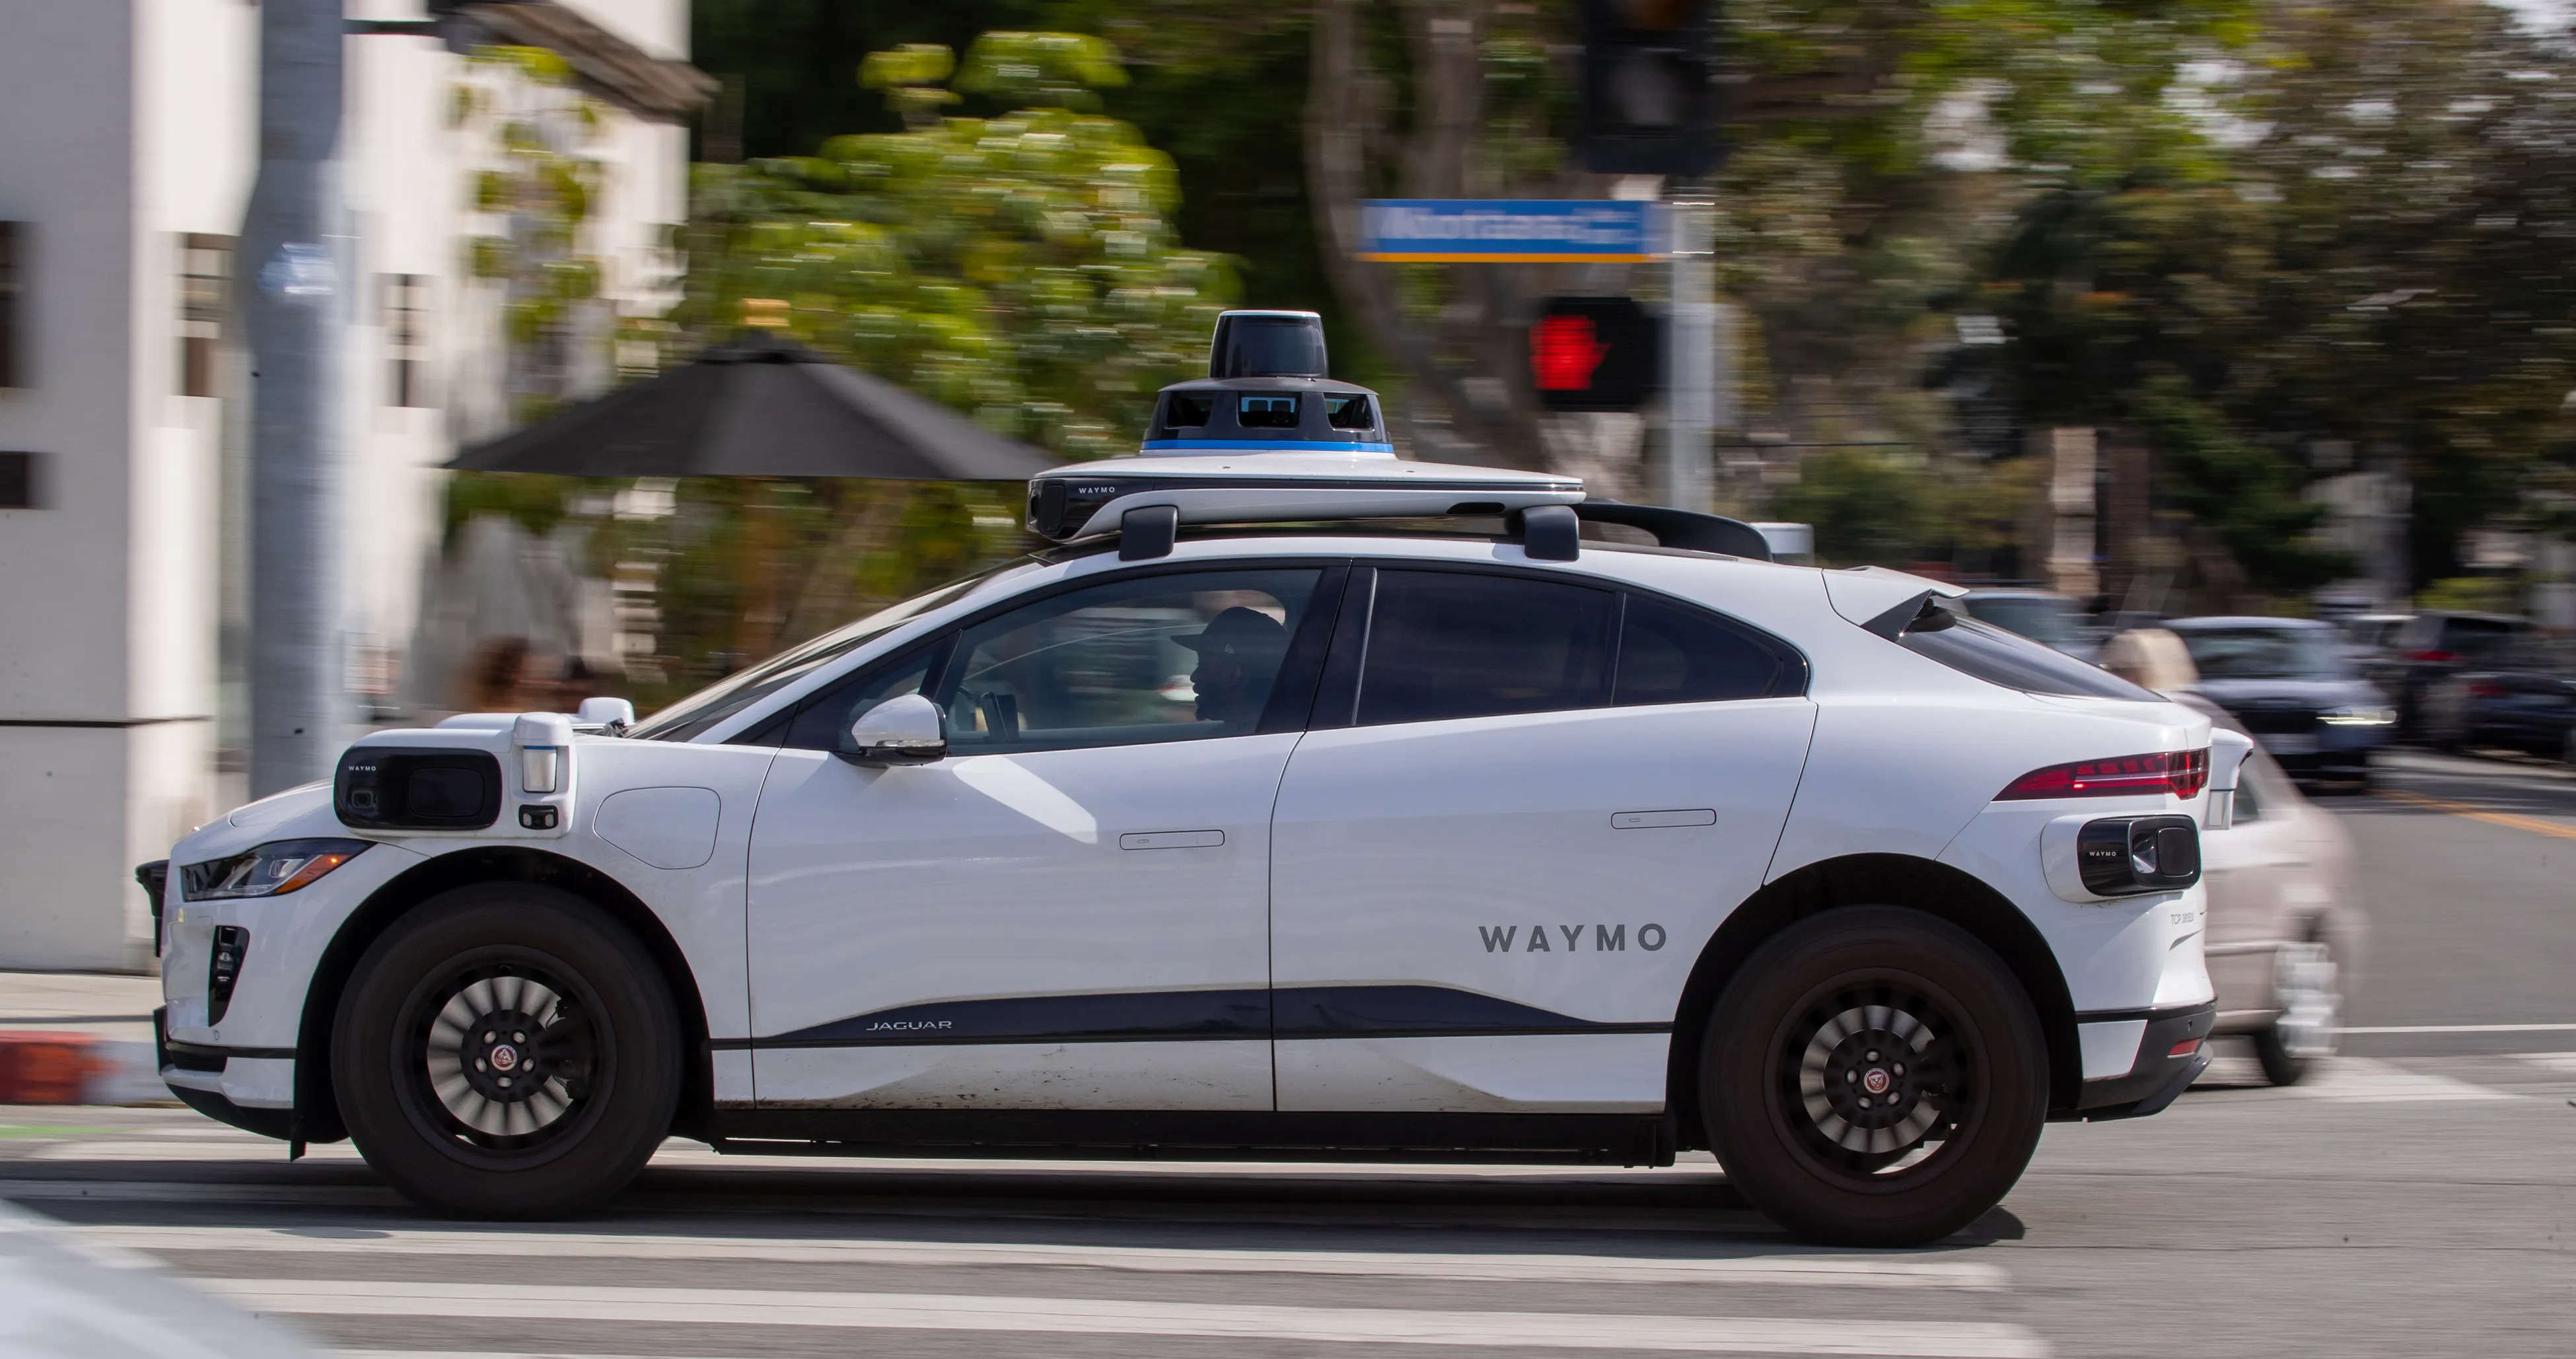 <p>"Waymo may begin fared driverless passenger service operations in the specified areas of Los Angeles and the San Francisco Peninsula, effective today," the CPUC said on a notice posted to its website on Friday.</p>